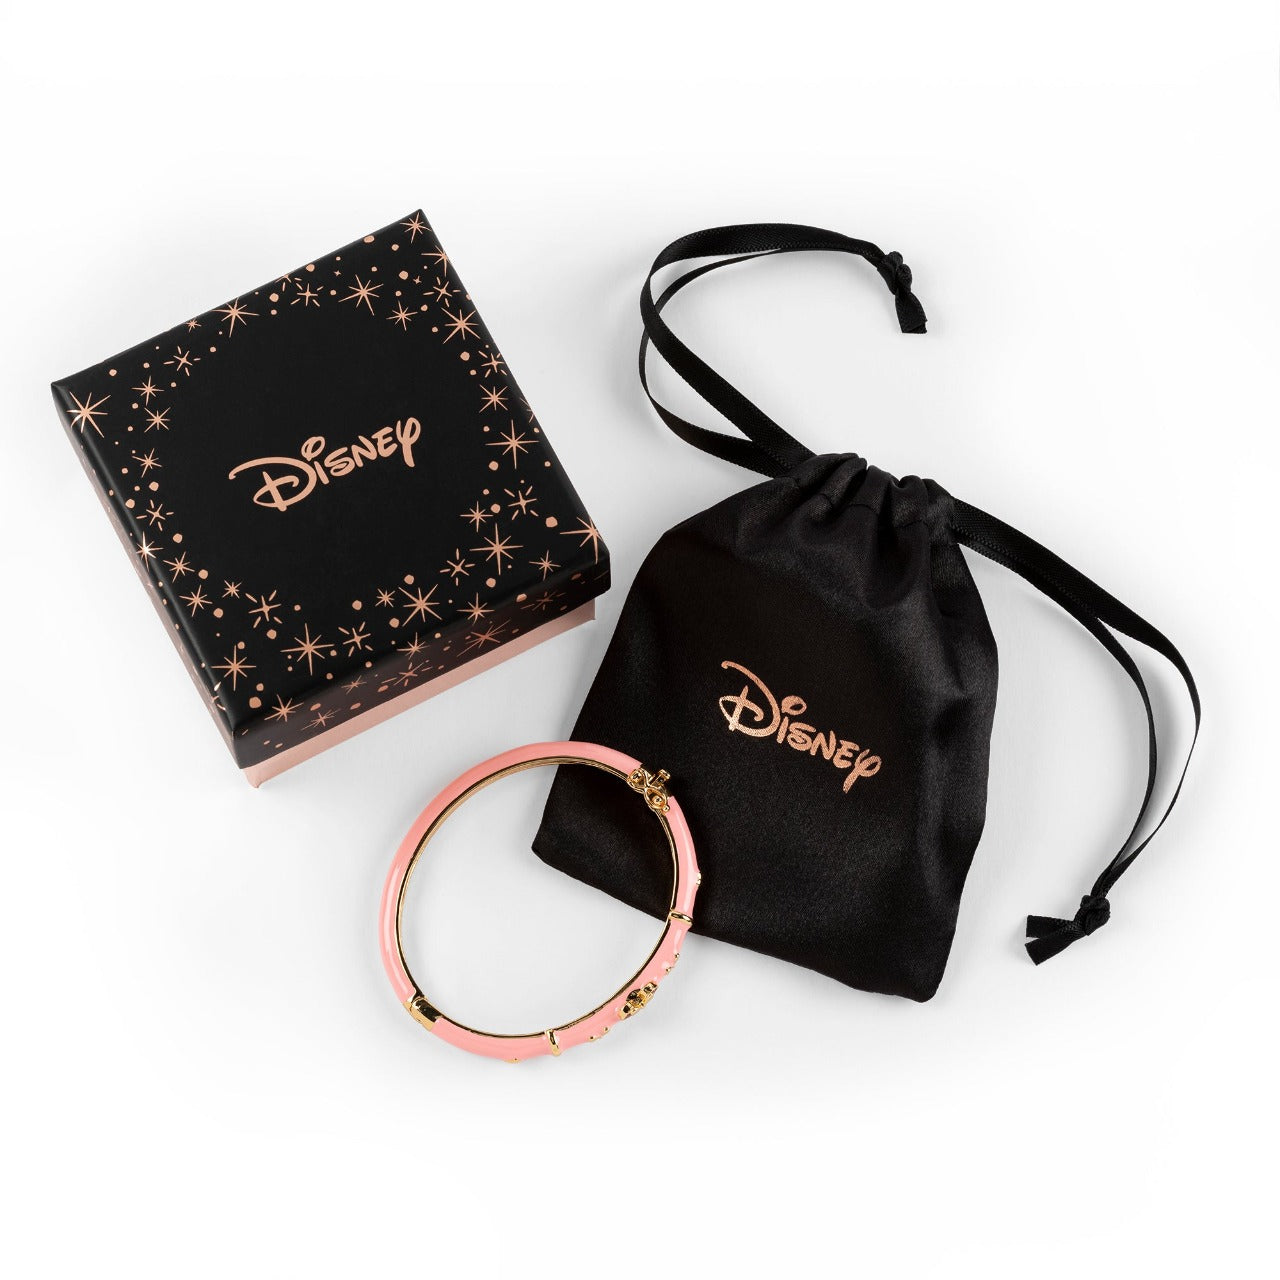 Disney Minnie Mouse Pink Glitter Bangle Bracelet with Yellow Gold Plating  Stunning pink and gold plated bracelet form a silhouette Minnie Mouse's with Rose Gold bow adds a feminine touch to the Disney classic piece of Jewellery.  Trendy and fashionable two tone design, the Disney Minnie Mouse Silhouette pink bracelet adds a chic, fun touch to any outfit.